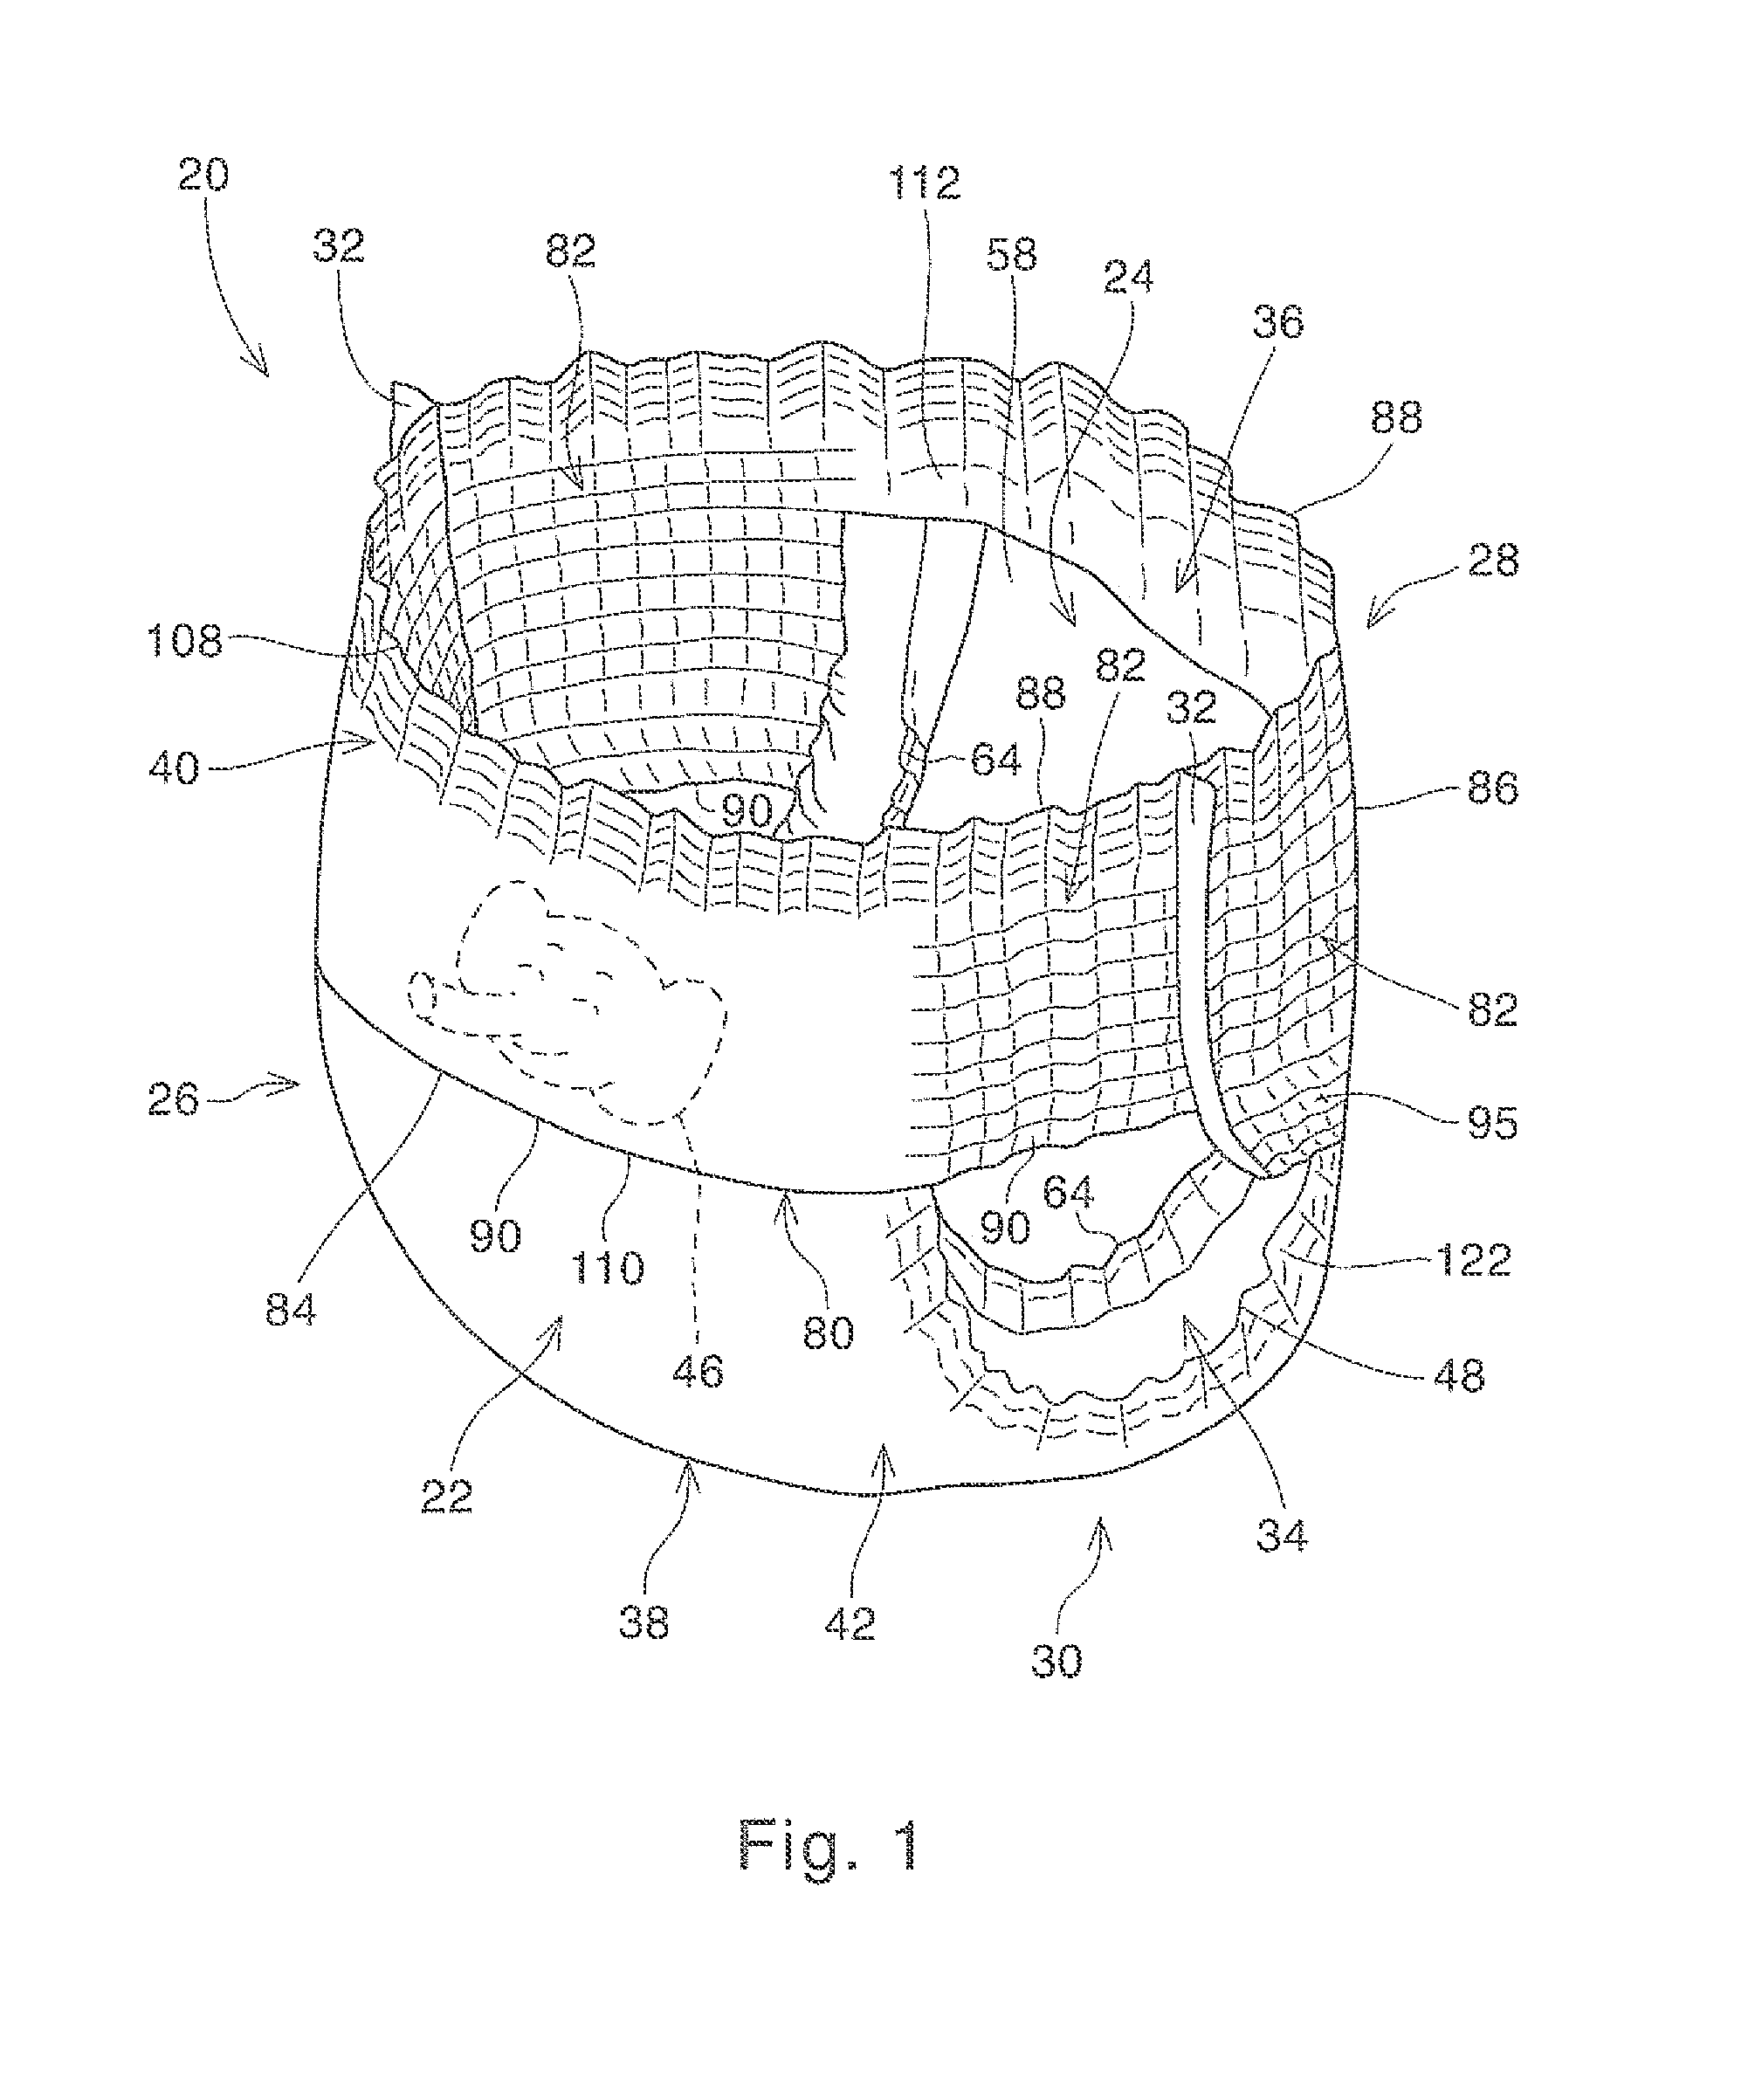 Elastic Member Cutting Roll System, Method, and Absorbent Article Made Therefrom